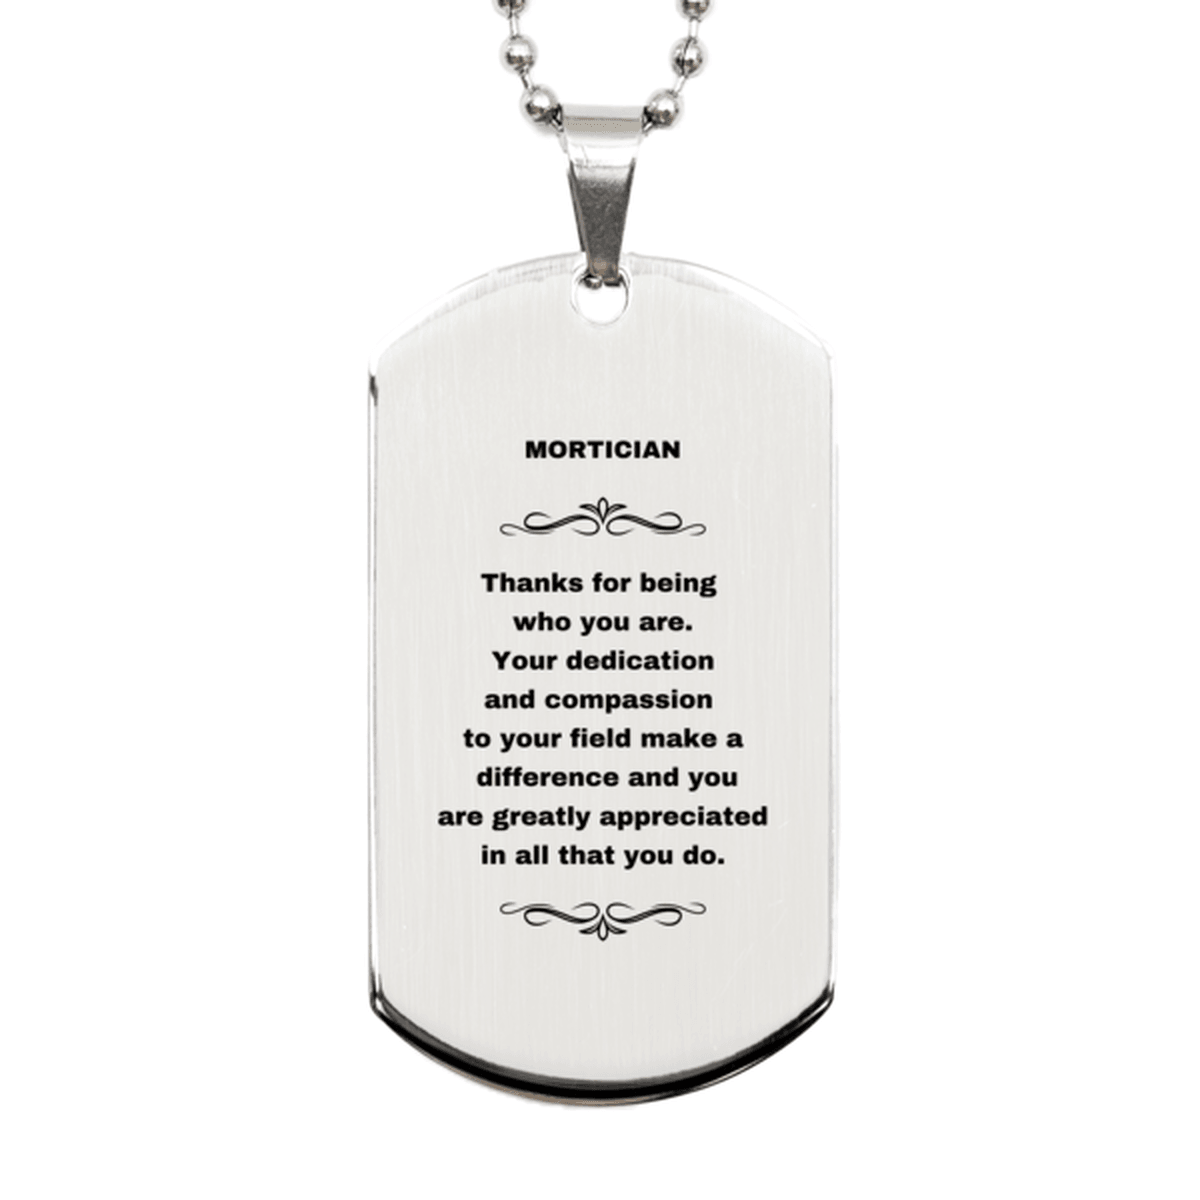 Mortician Silver Dog Tag Necklace - Thanks for being who you are - Birthday Christmas Jewelry Gifts Coworkers Colleague Boss - Mallard Moon Gift Shop